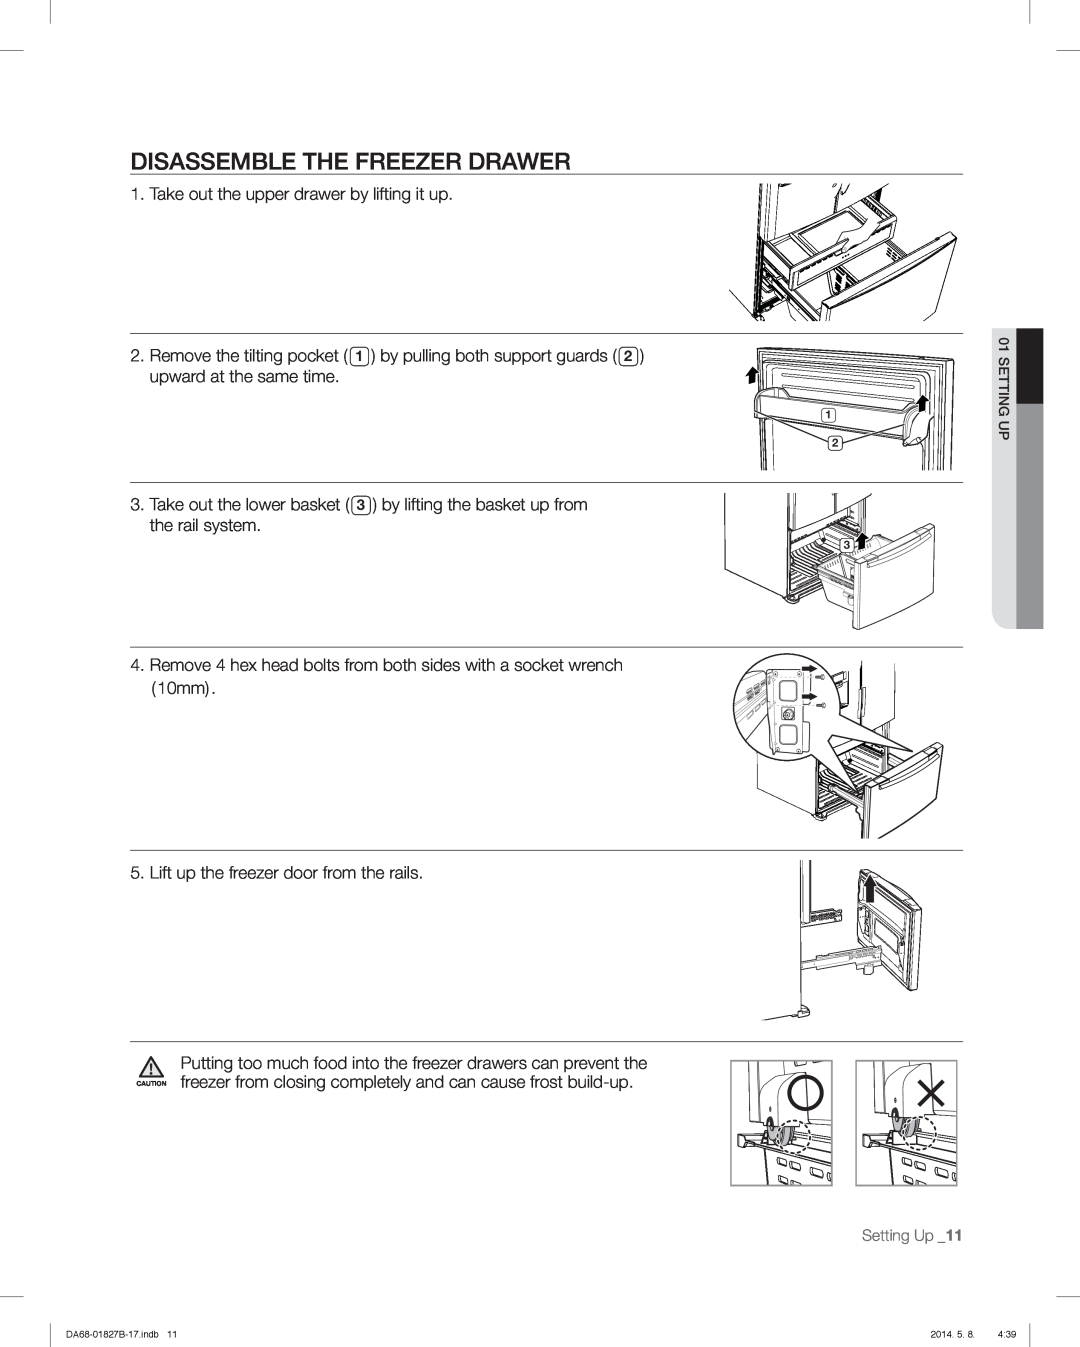 Samsung RFG237AABP, RFG237AARS, RFG237AAWP user manual Disassemble The Freezer Drawer 